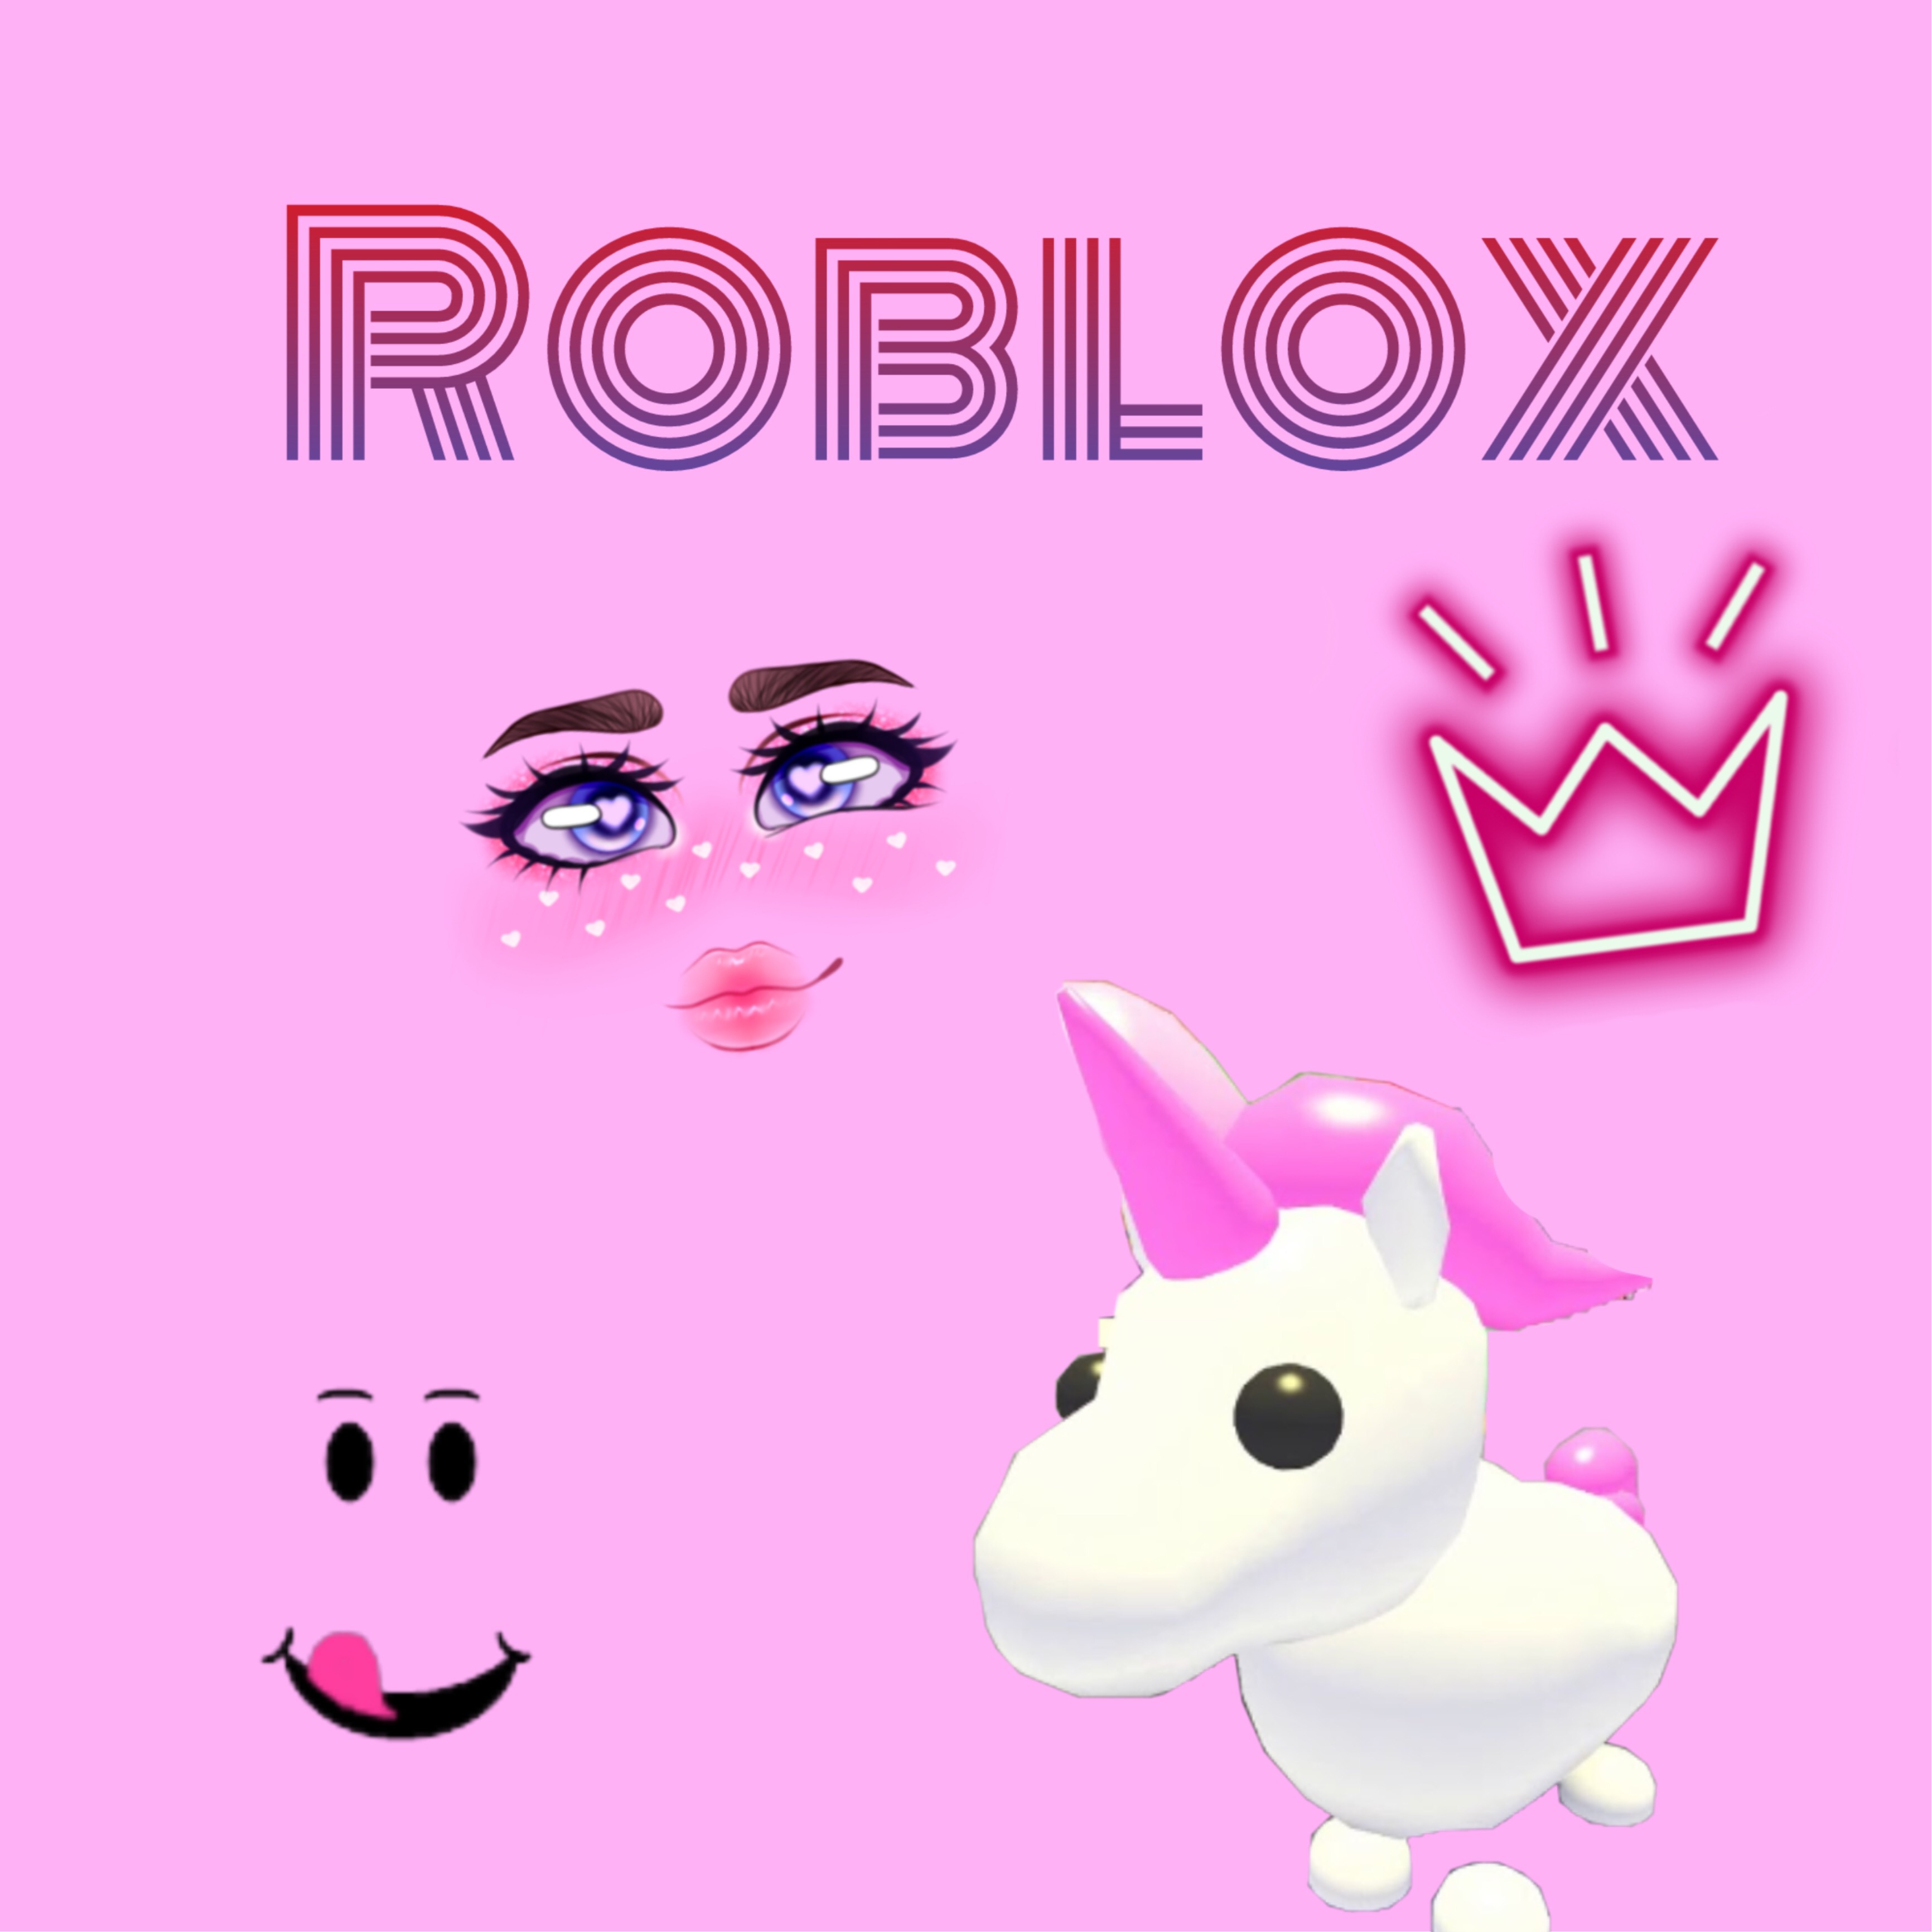 Roblox Wallpaper Wallpaperedit Image By Wallpaper - how to change roblox background to pink